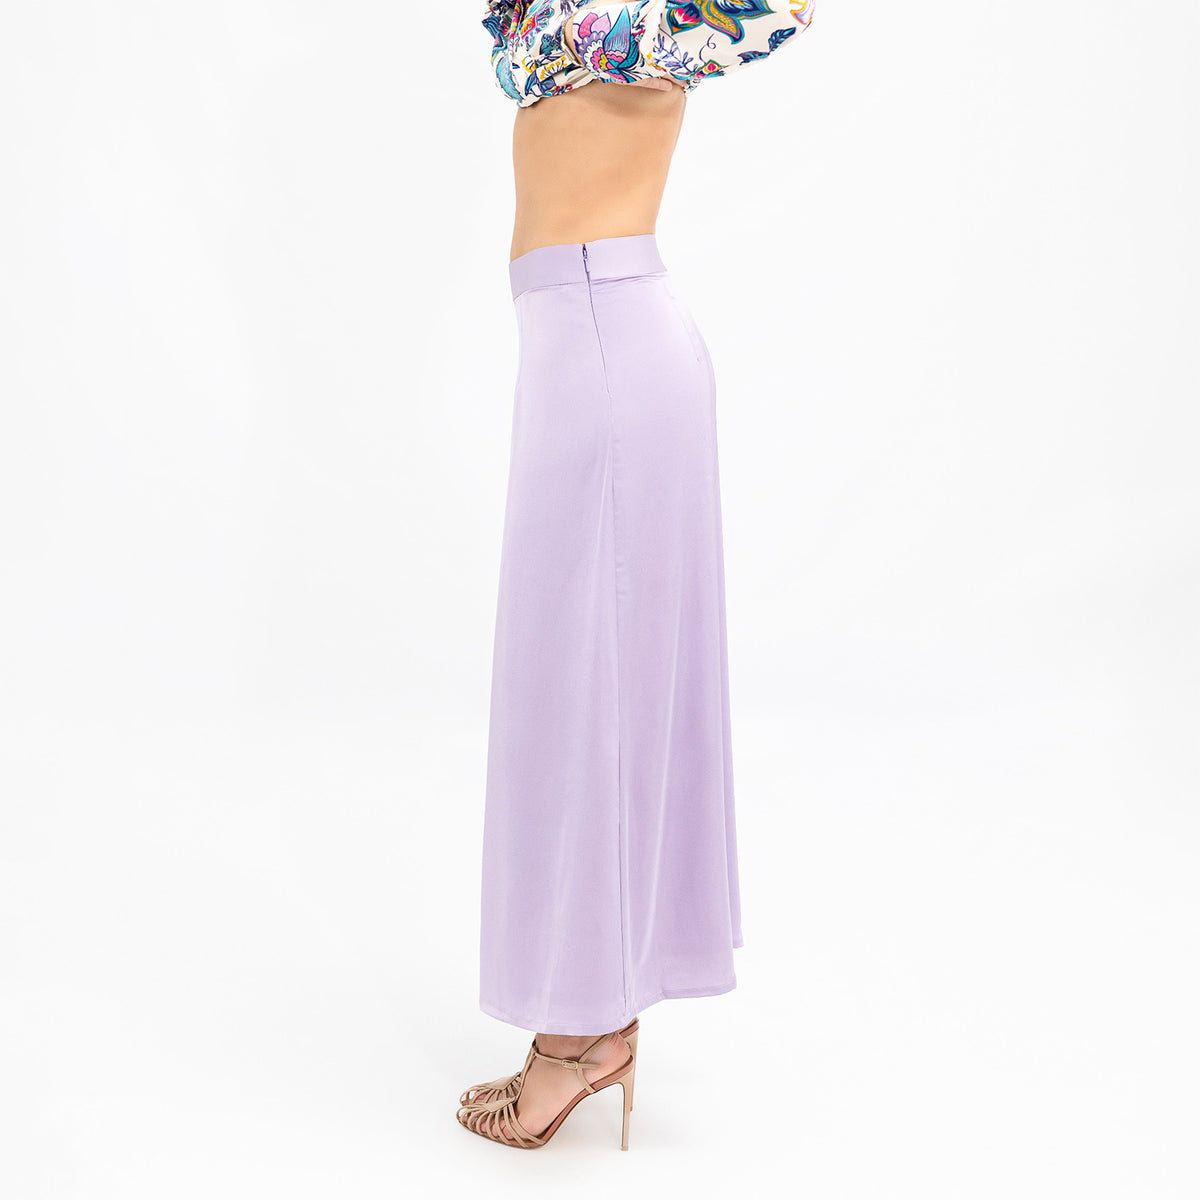 Lavender Satin Low-Waisted Maxi Skirt